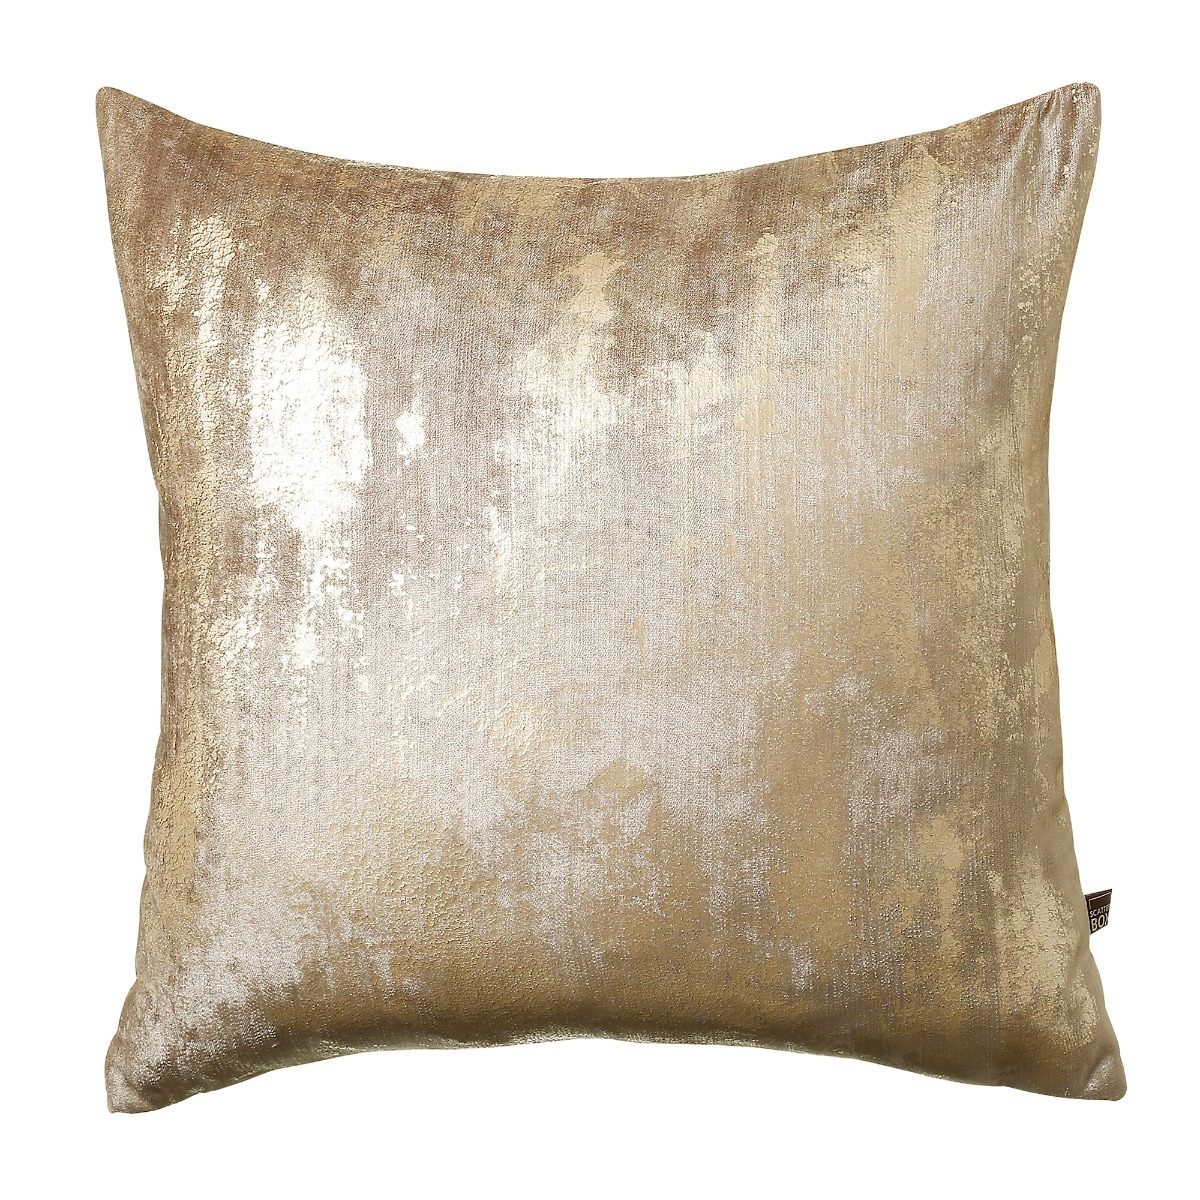 Abstract Champagne Cushion, Square, Neutral - Barker & Stonehouse - image 1